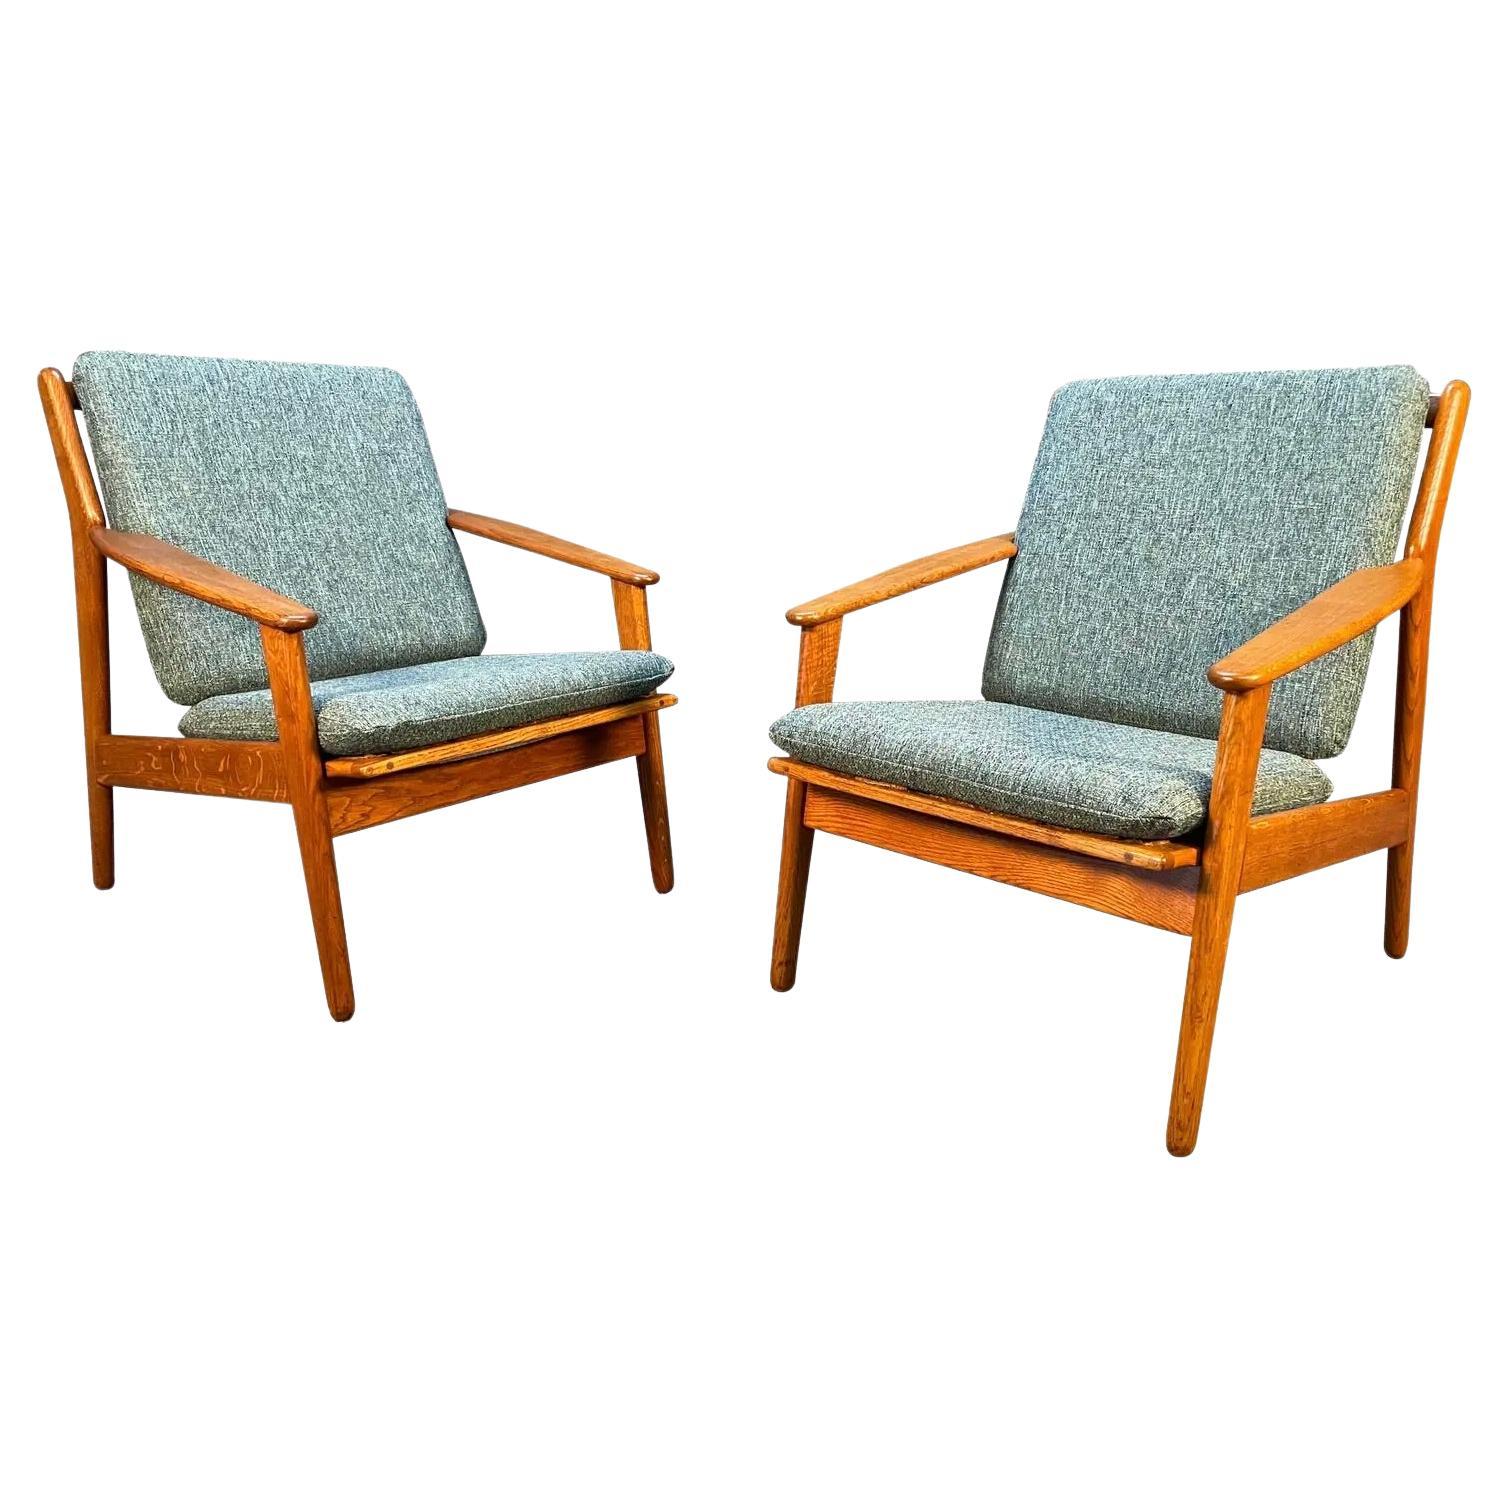 Pair of Vintage Danish Midcentury Oak Lounge Chairs Model "J55" by Poul Volther For Sale